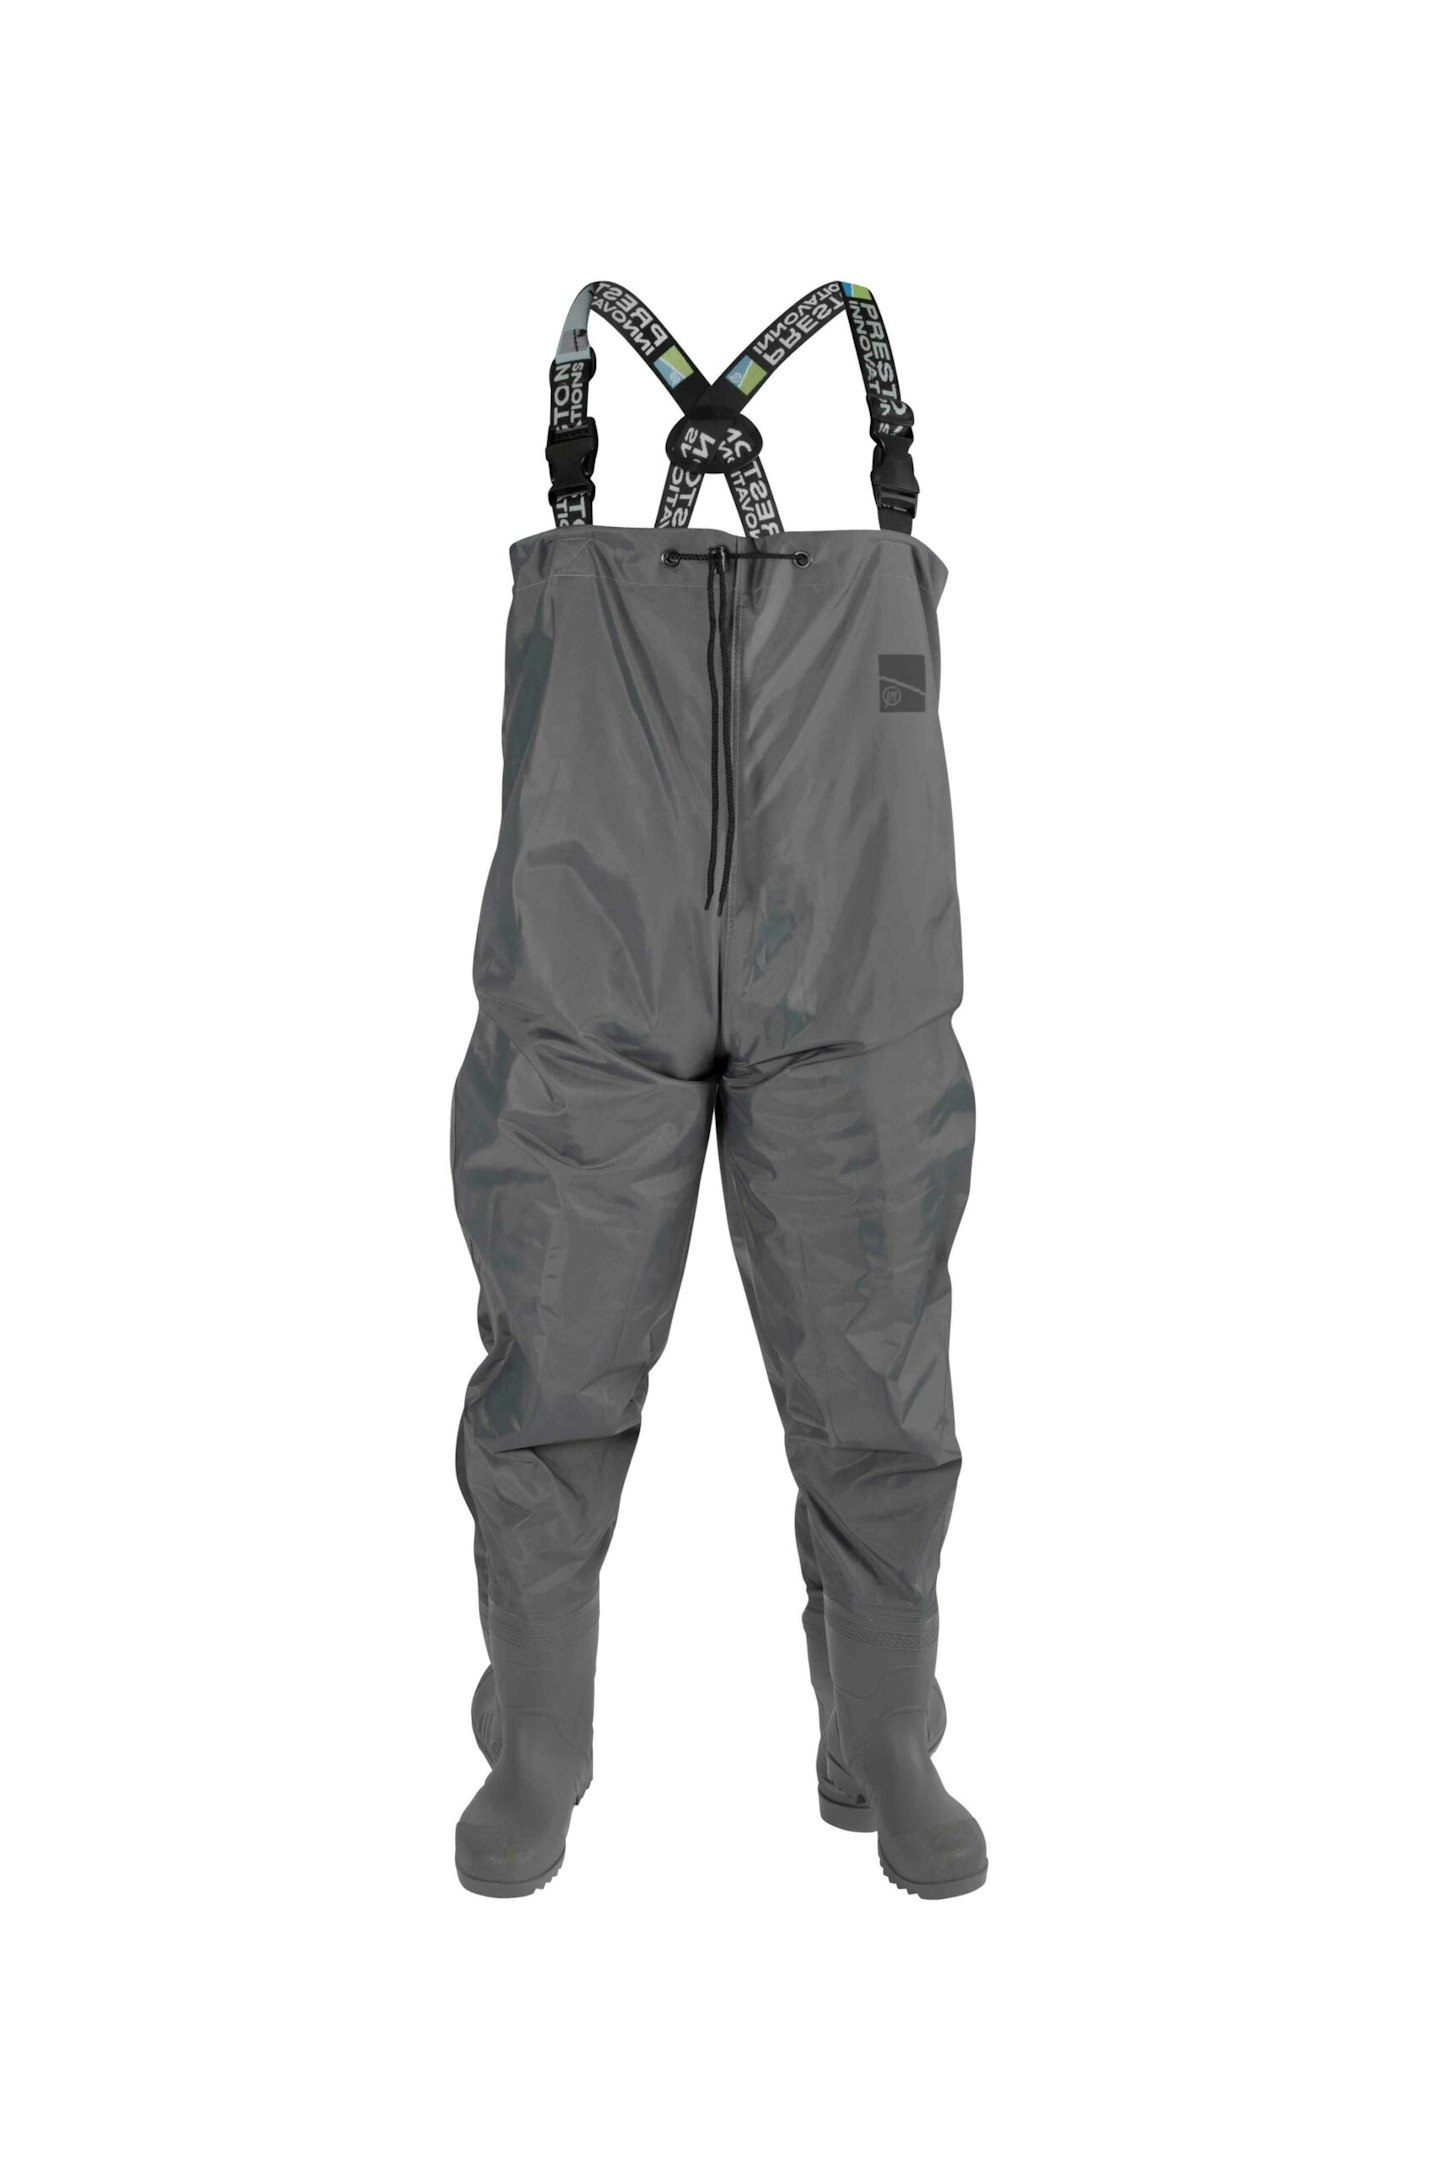 The Best Fishing Waders